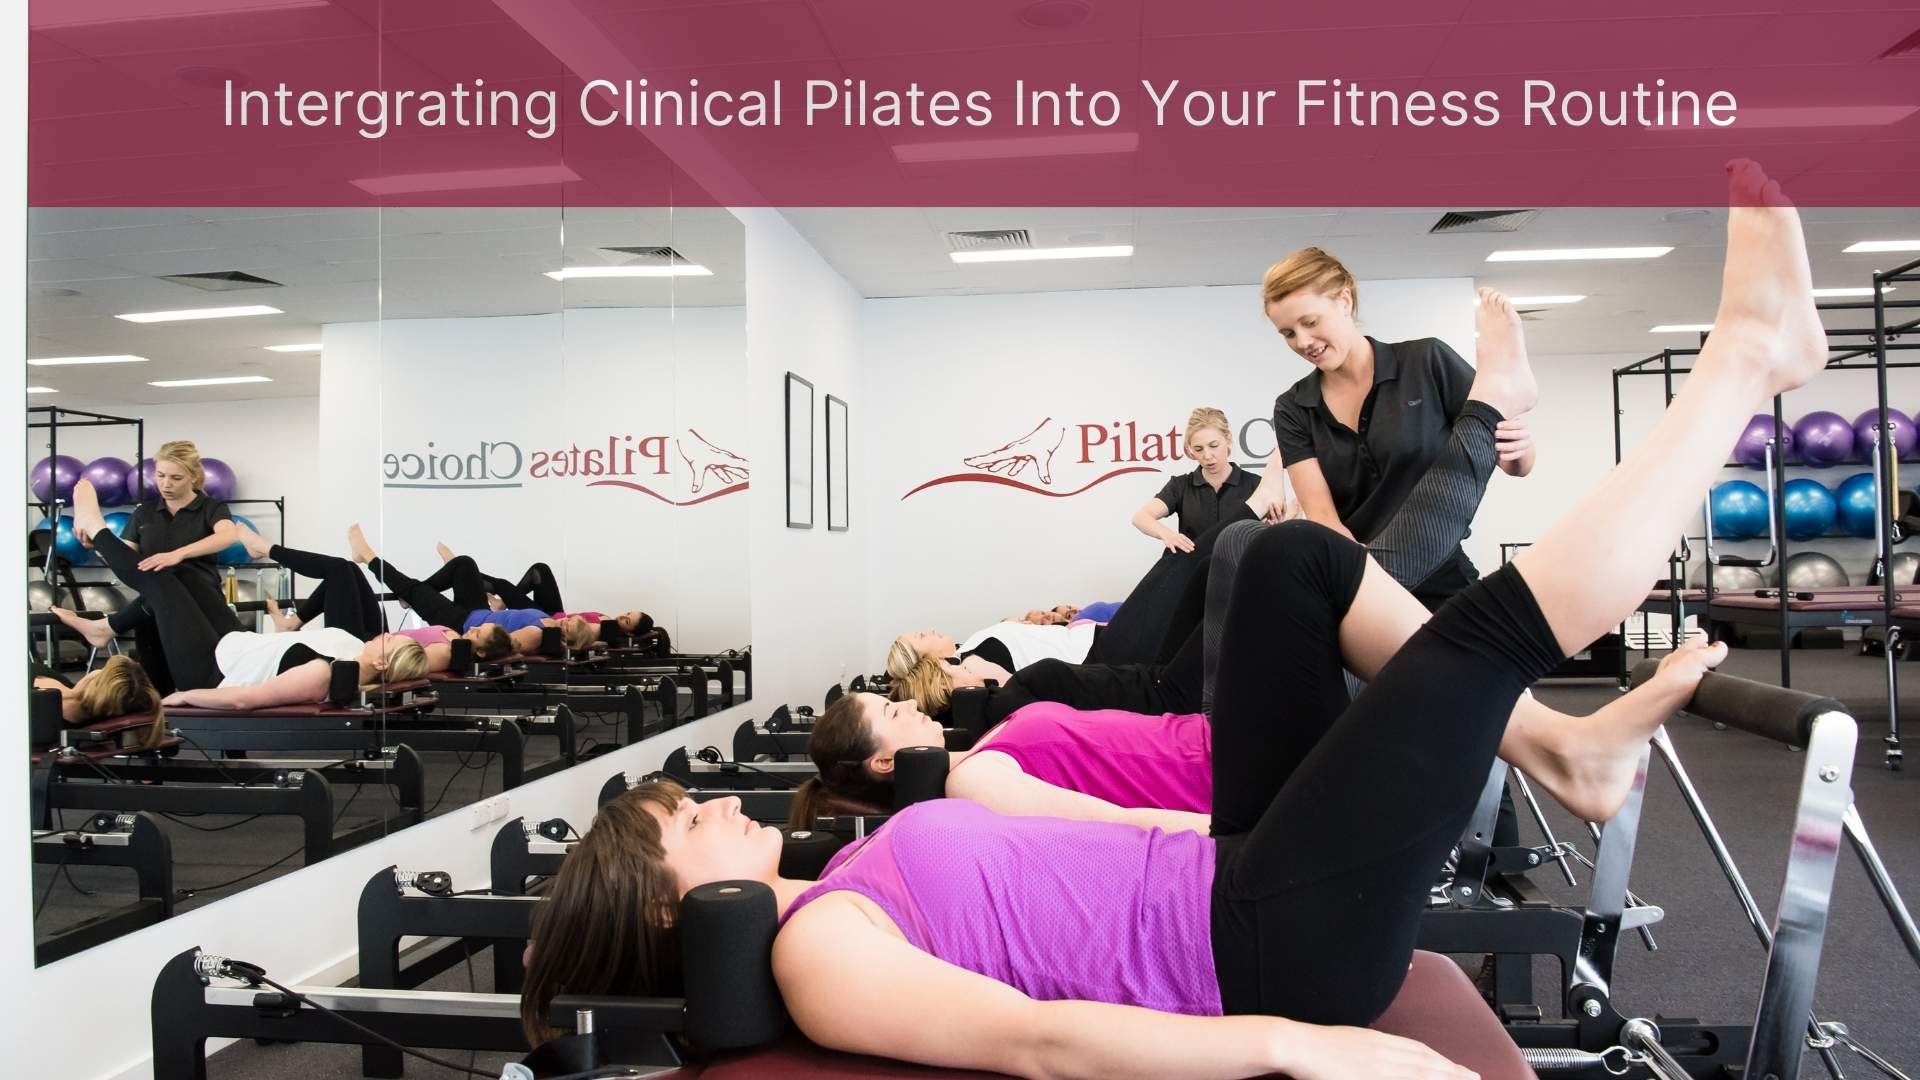 Integrating Clinical Pilates Into Your Fitness Routine